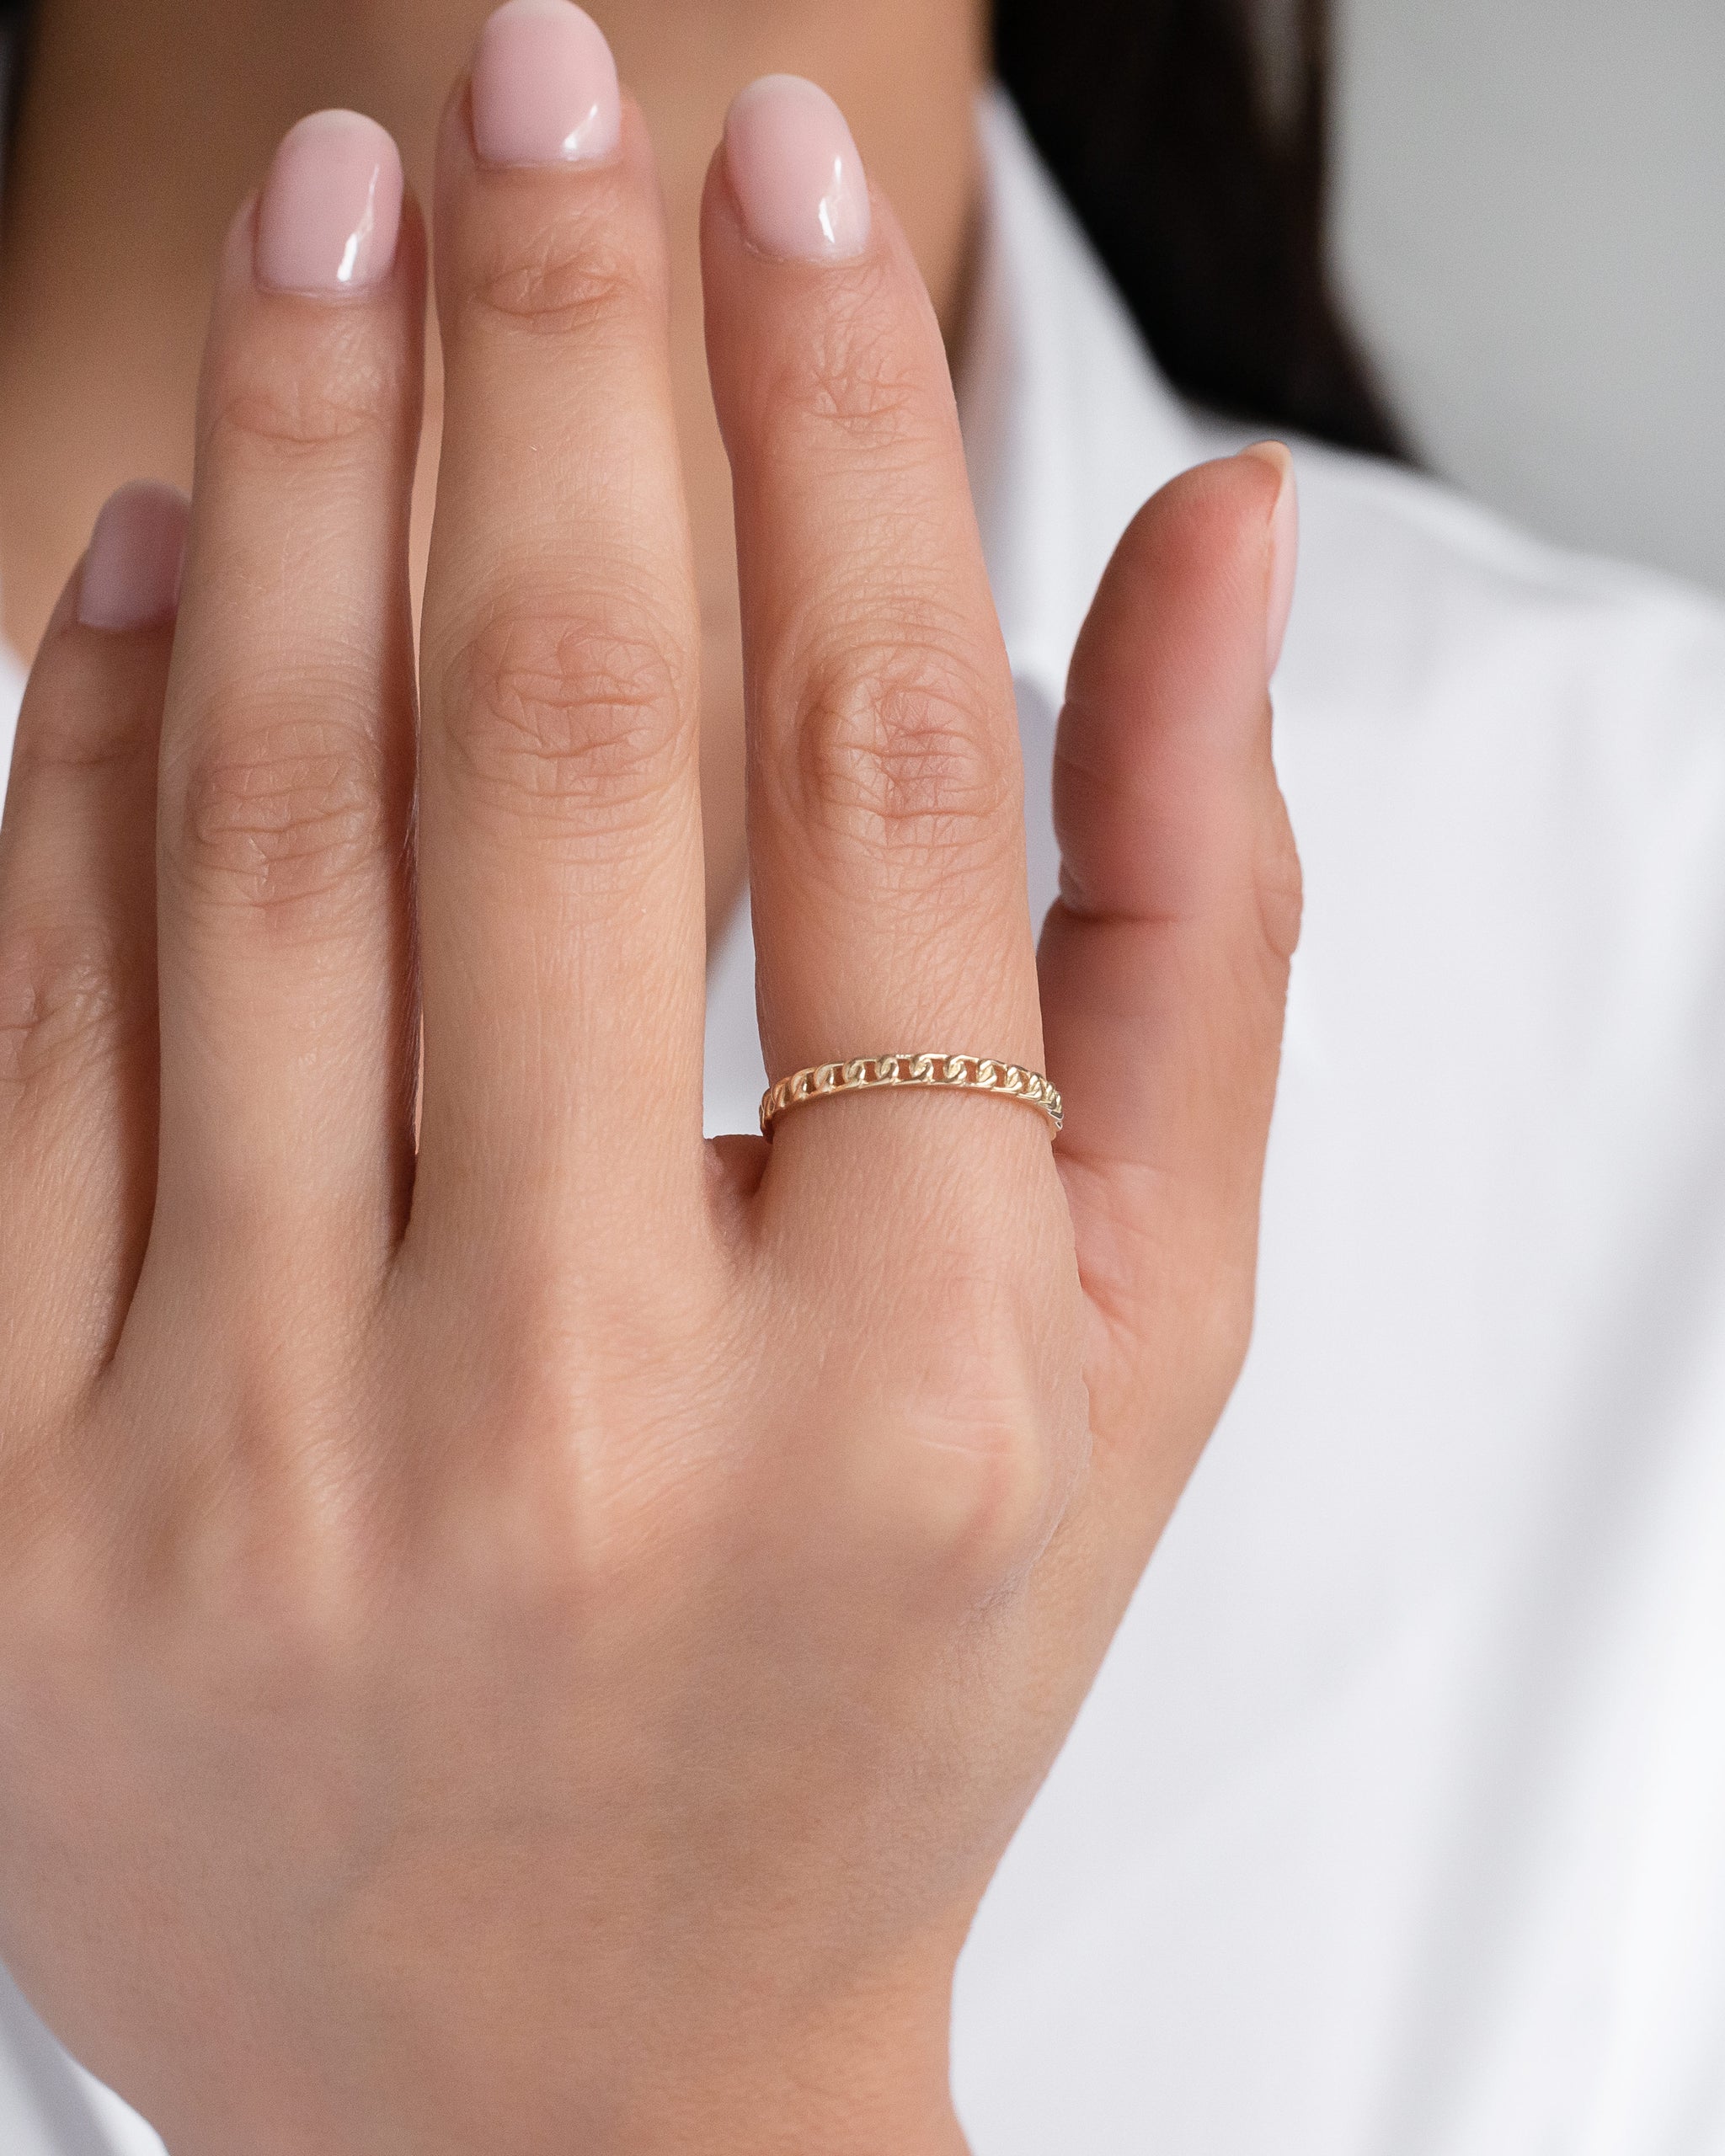 14K SOLID GOLD - LOVE THIN DISK BAND RING - DIAMONDS - SO PRETTY CARA COTTER